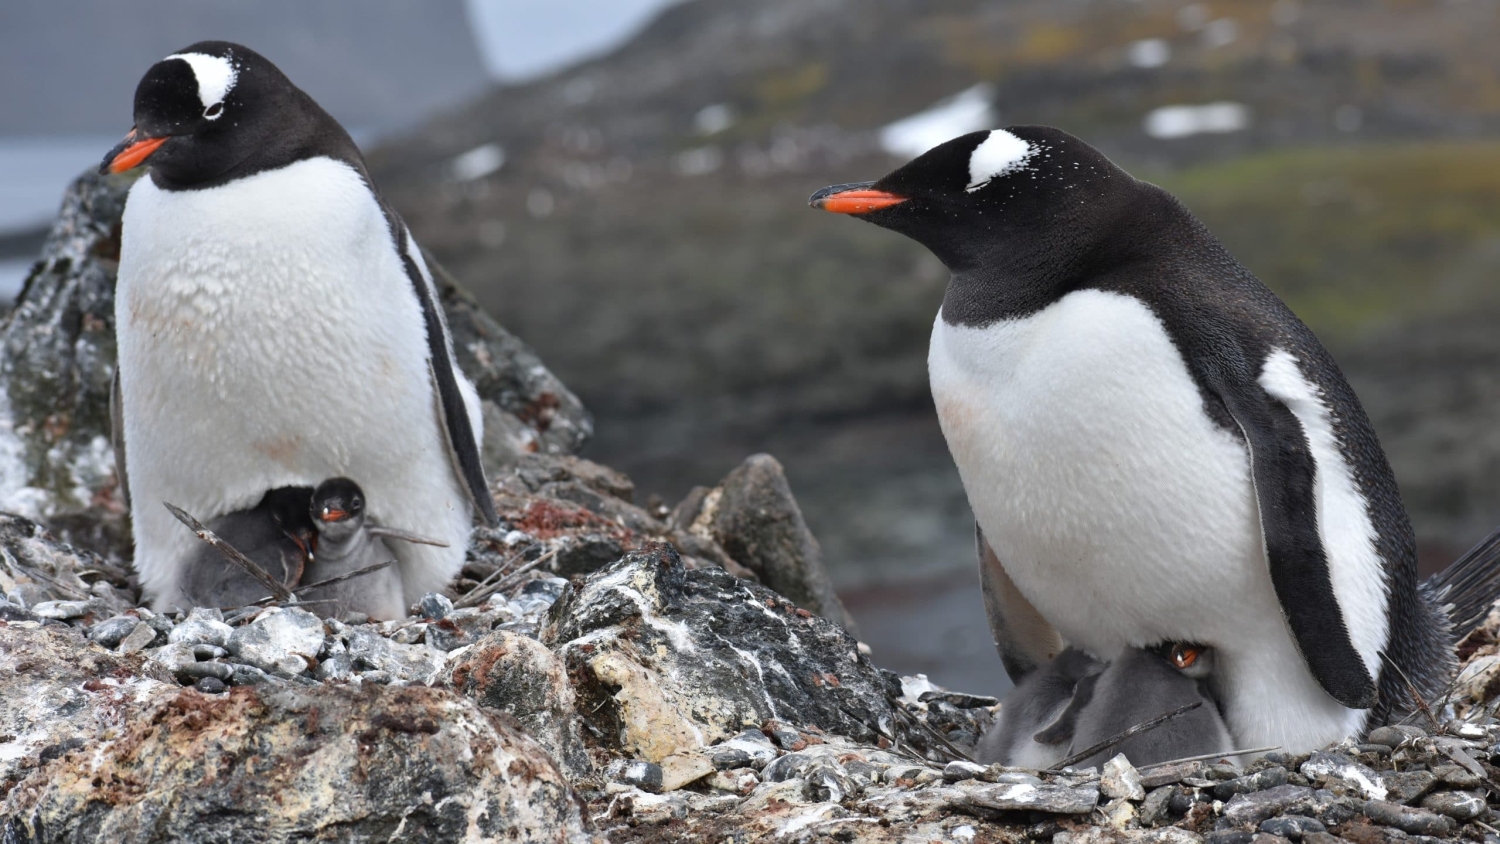 Penguins in Antarctica - Some See Antarctica as ‘Last Chance’ Destination; for Others, It’s a Backdrop - College of Natural Resources News NC State University